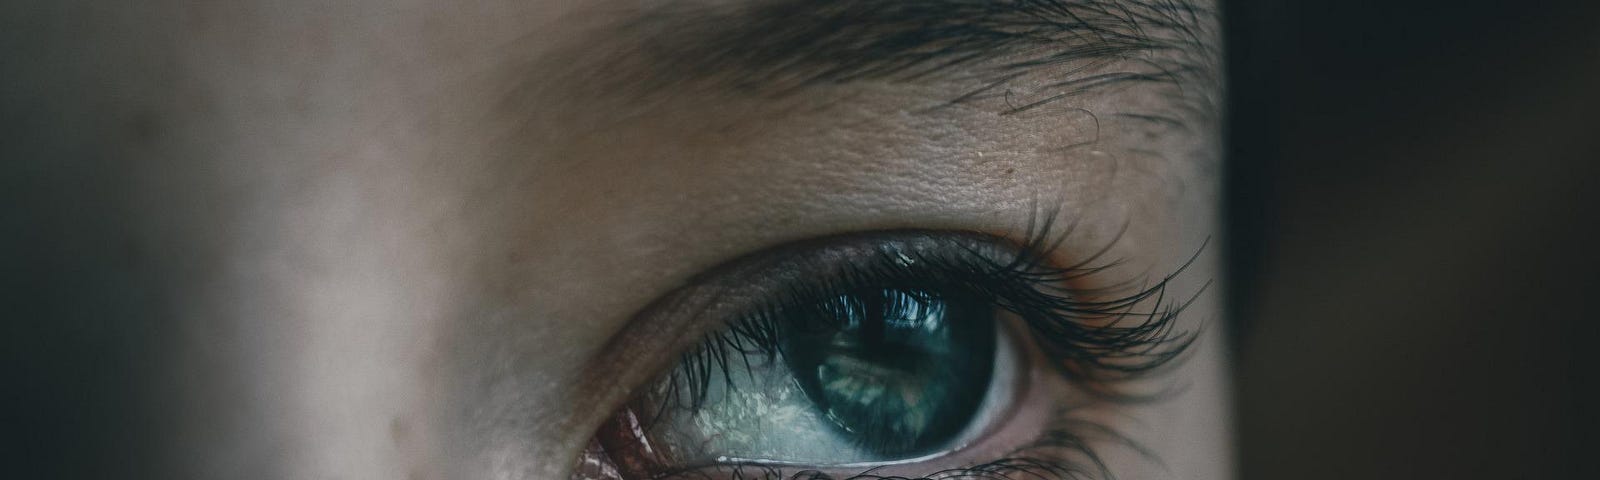 A close up of a single green eye in a freckled face. The background is black.